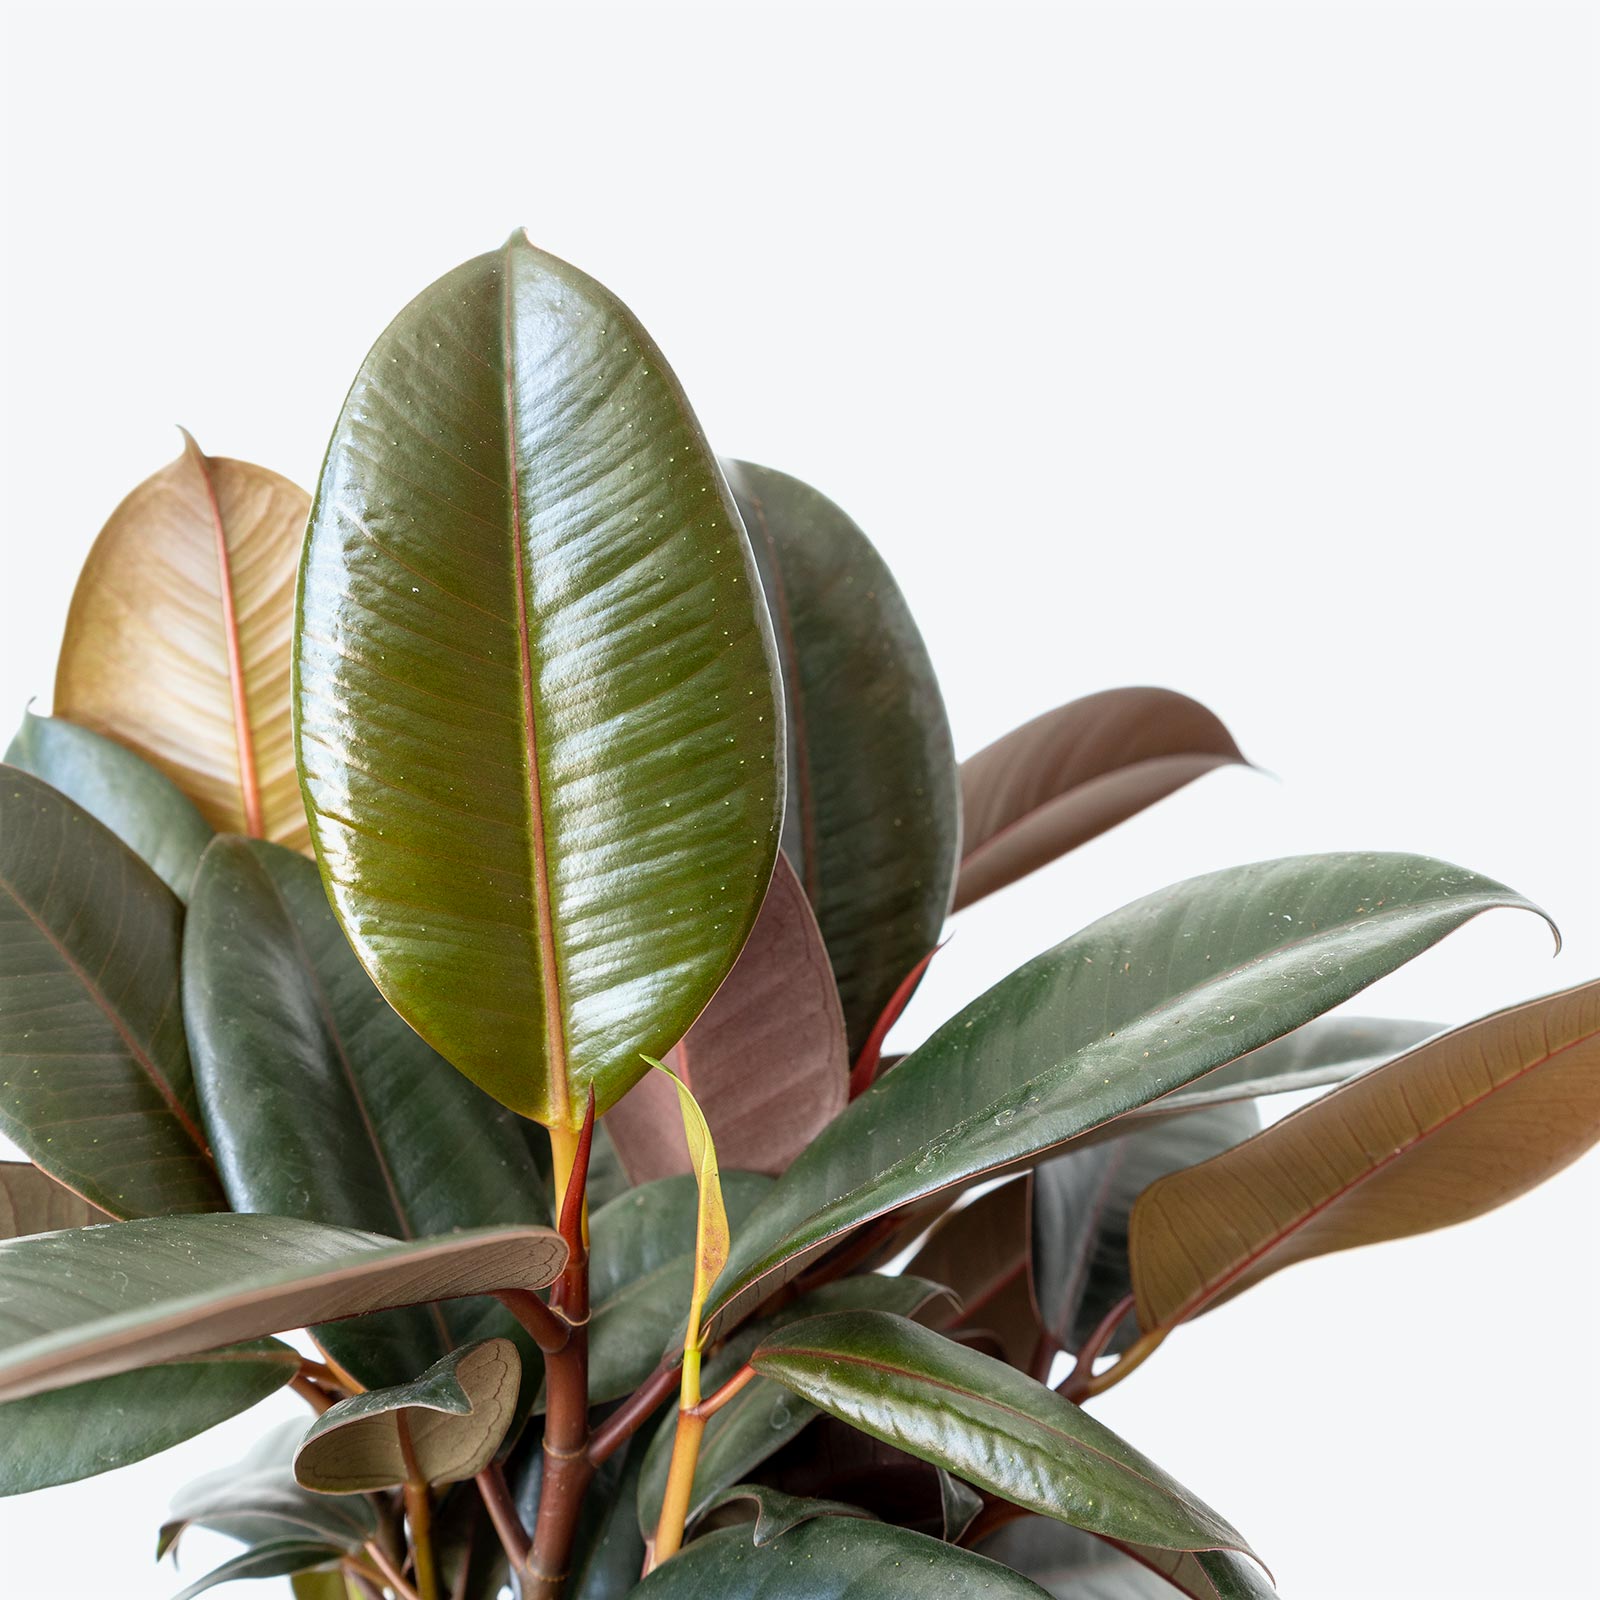 How to take care of Rubber Plant  Plant Care and Tips - JOMO Studio